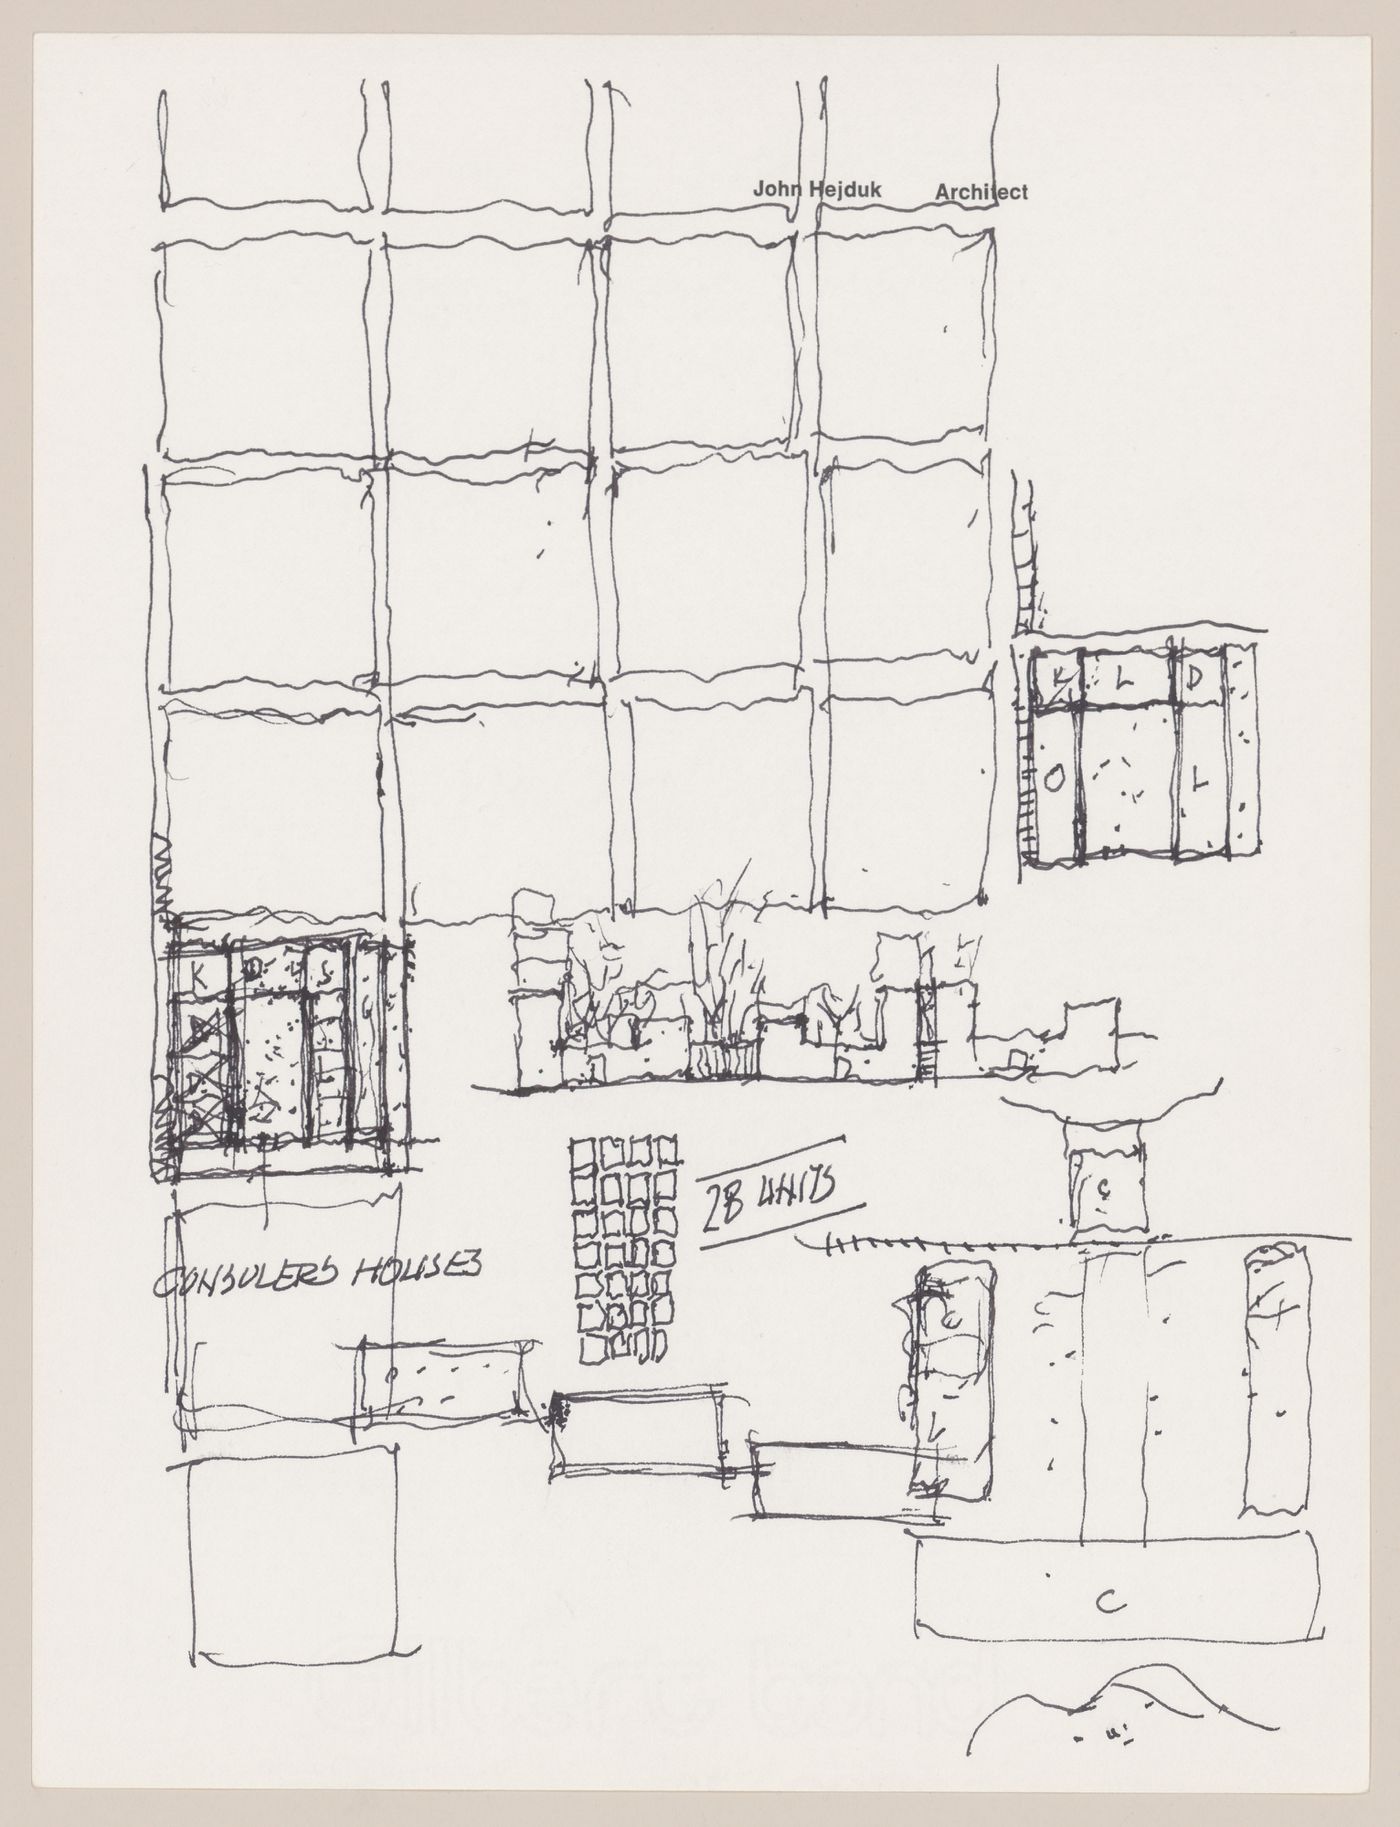 Sketch site plan with annotations for Victims II